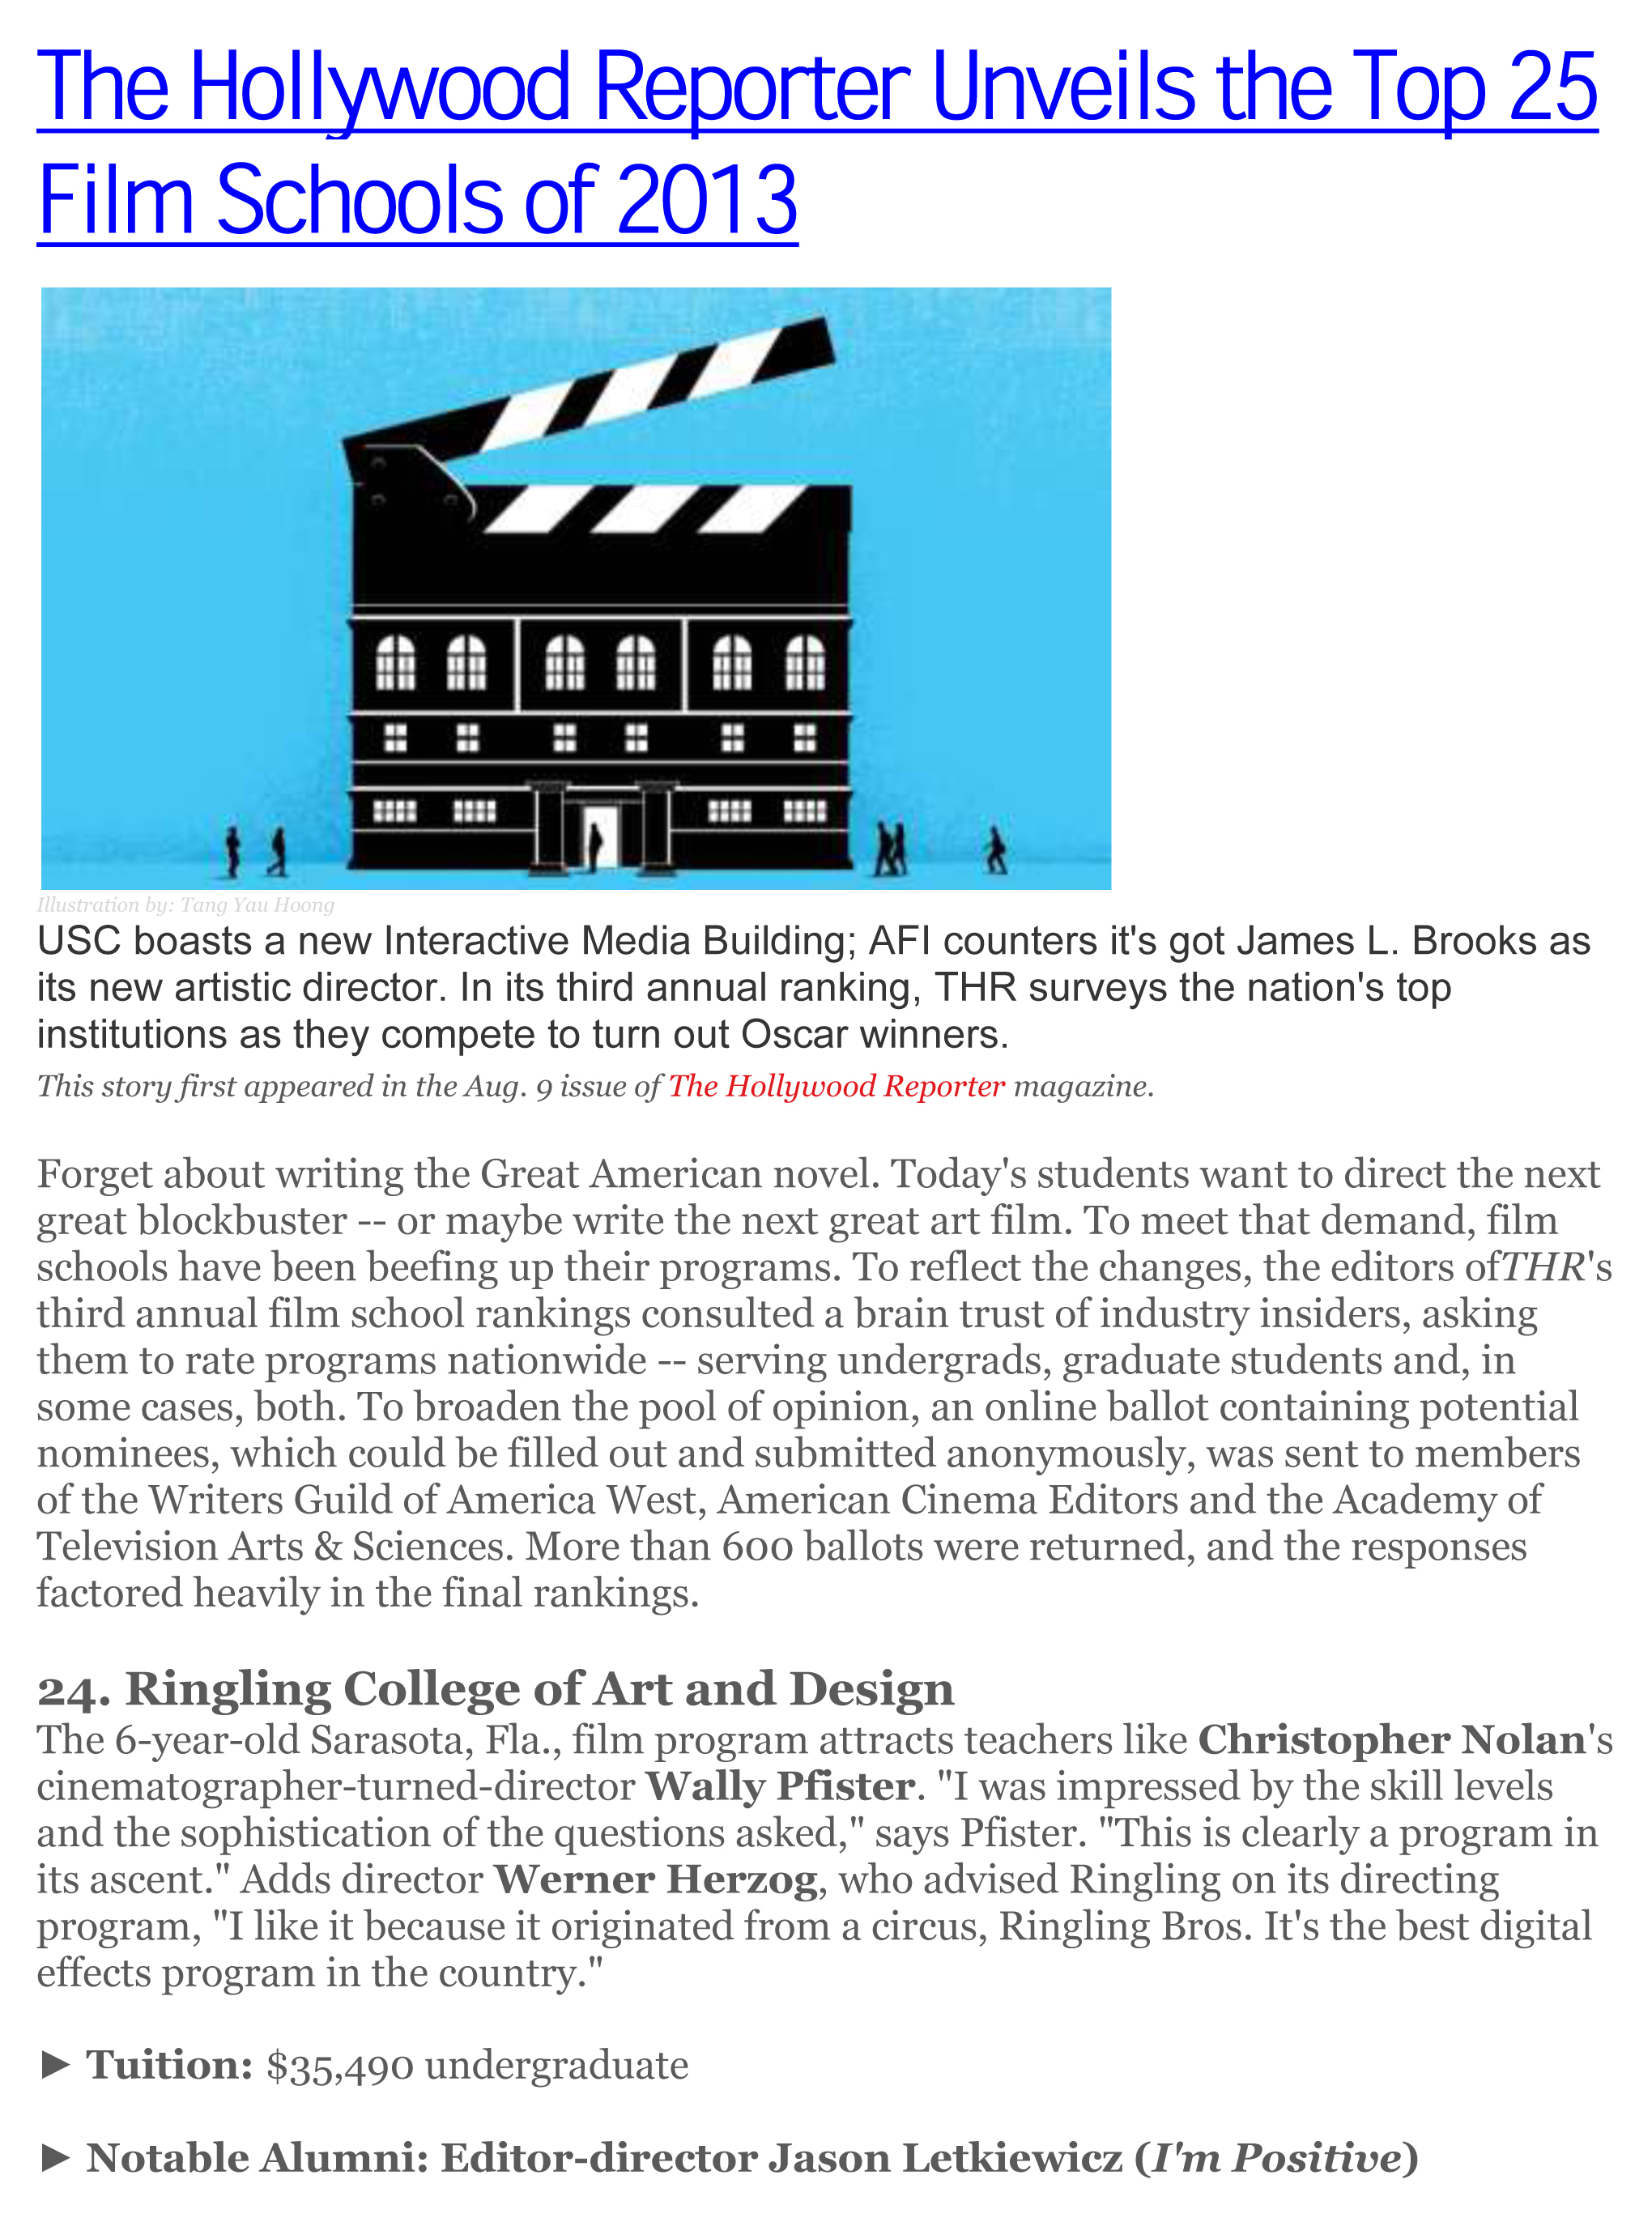 The Hollywood Reporter Ranks Ringling College As One Of The ‘25 Best Film Schools Worldwide